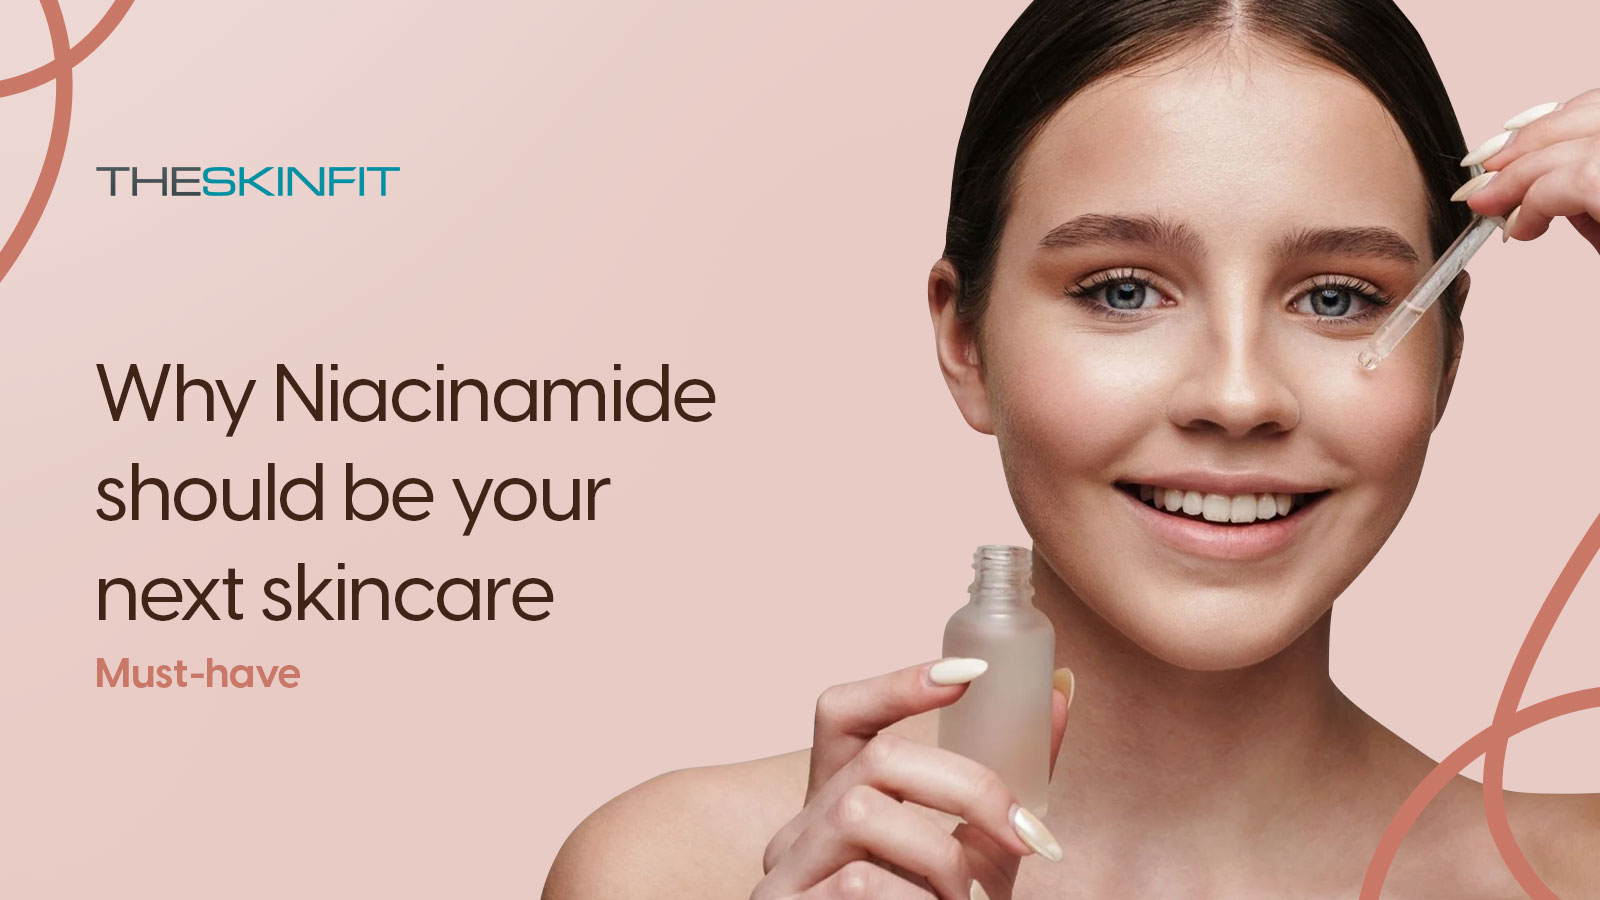 Niacinamide The Skincare Secret That Will Change Your Life! 